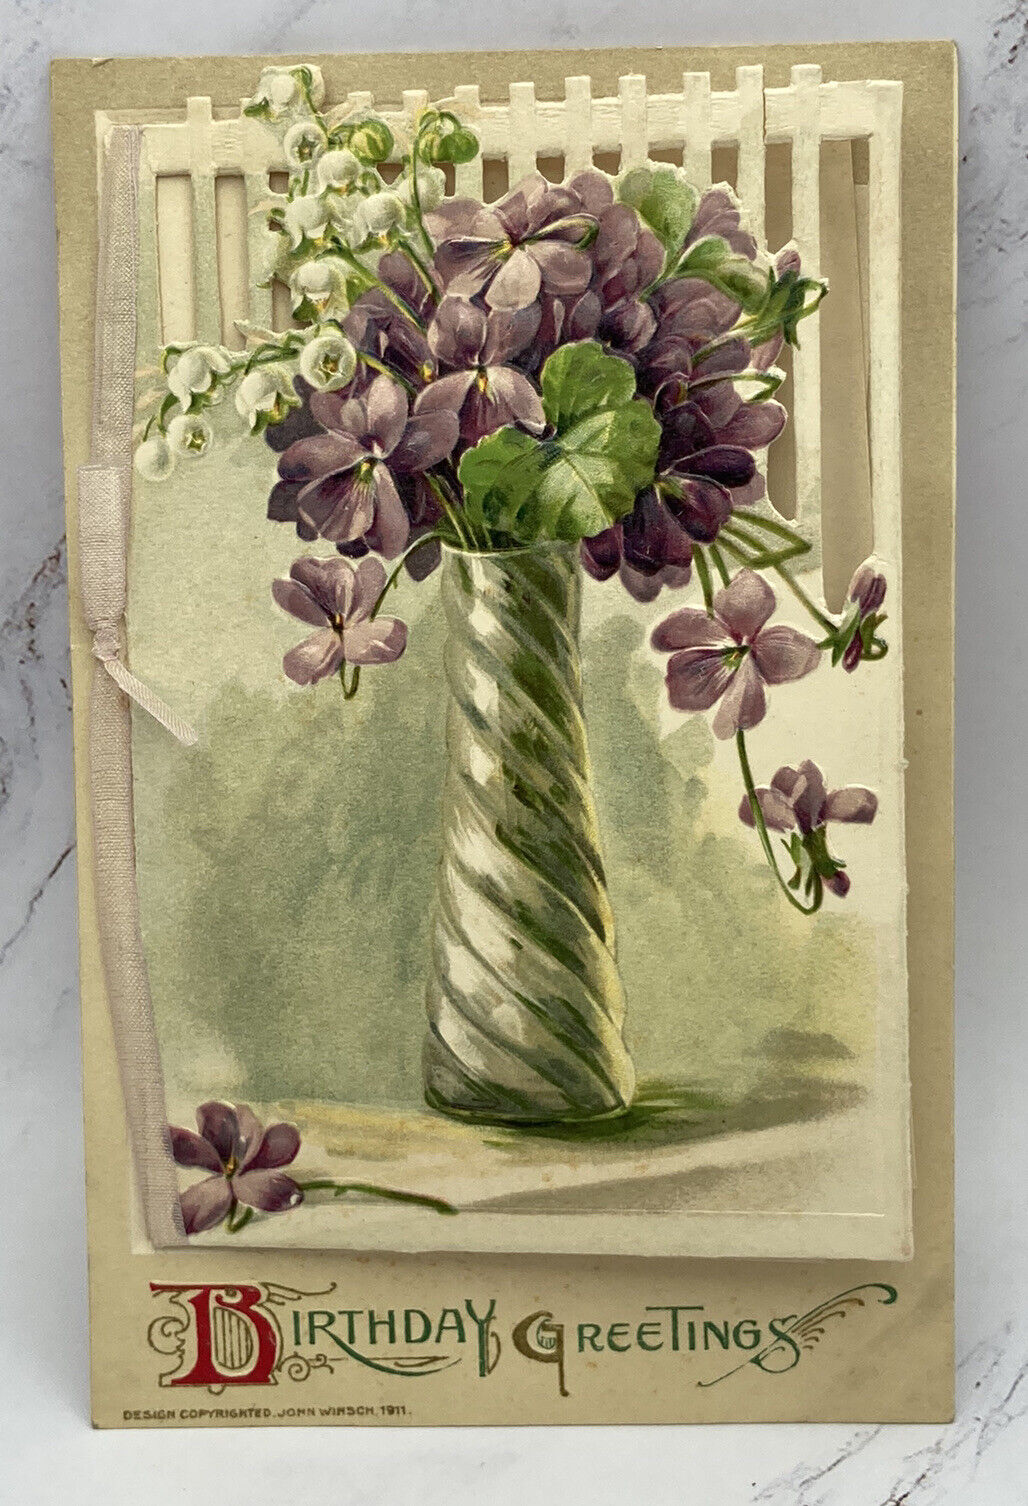 1911 Birthday Greetings Floral Design Fold-Out ANTIQUE Postcard John Winsch